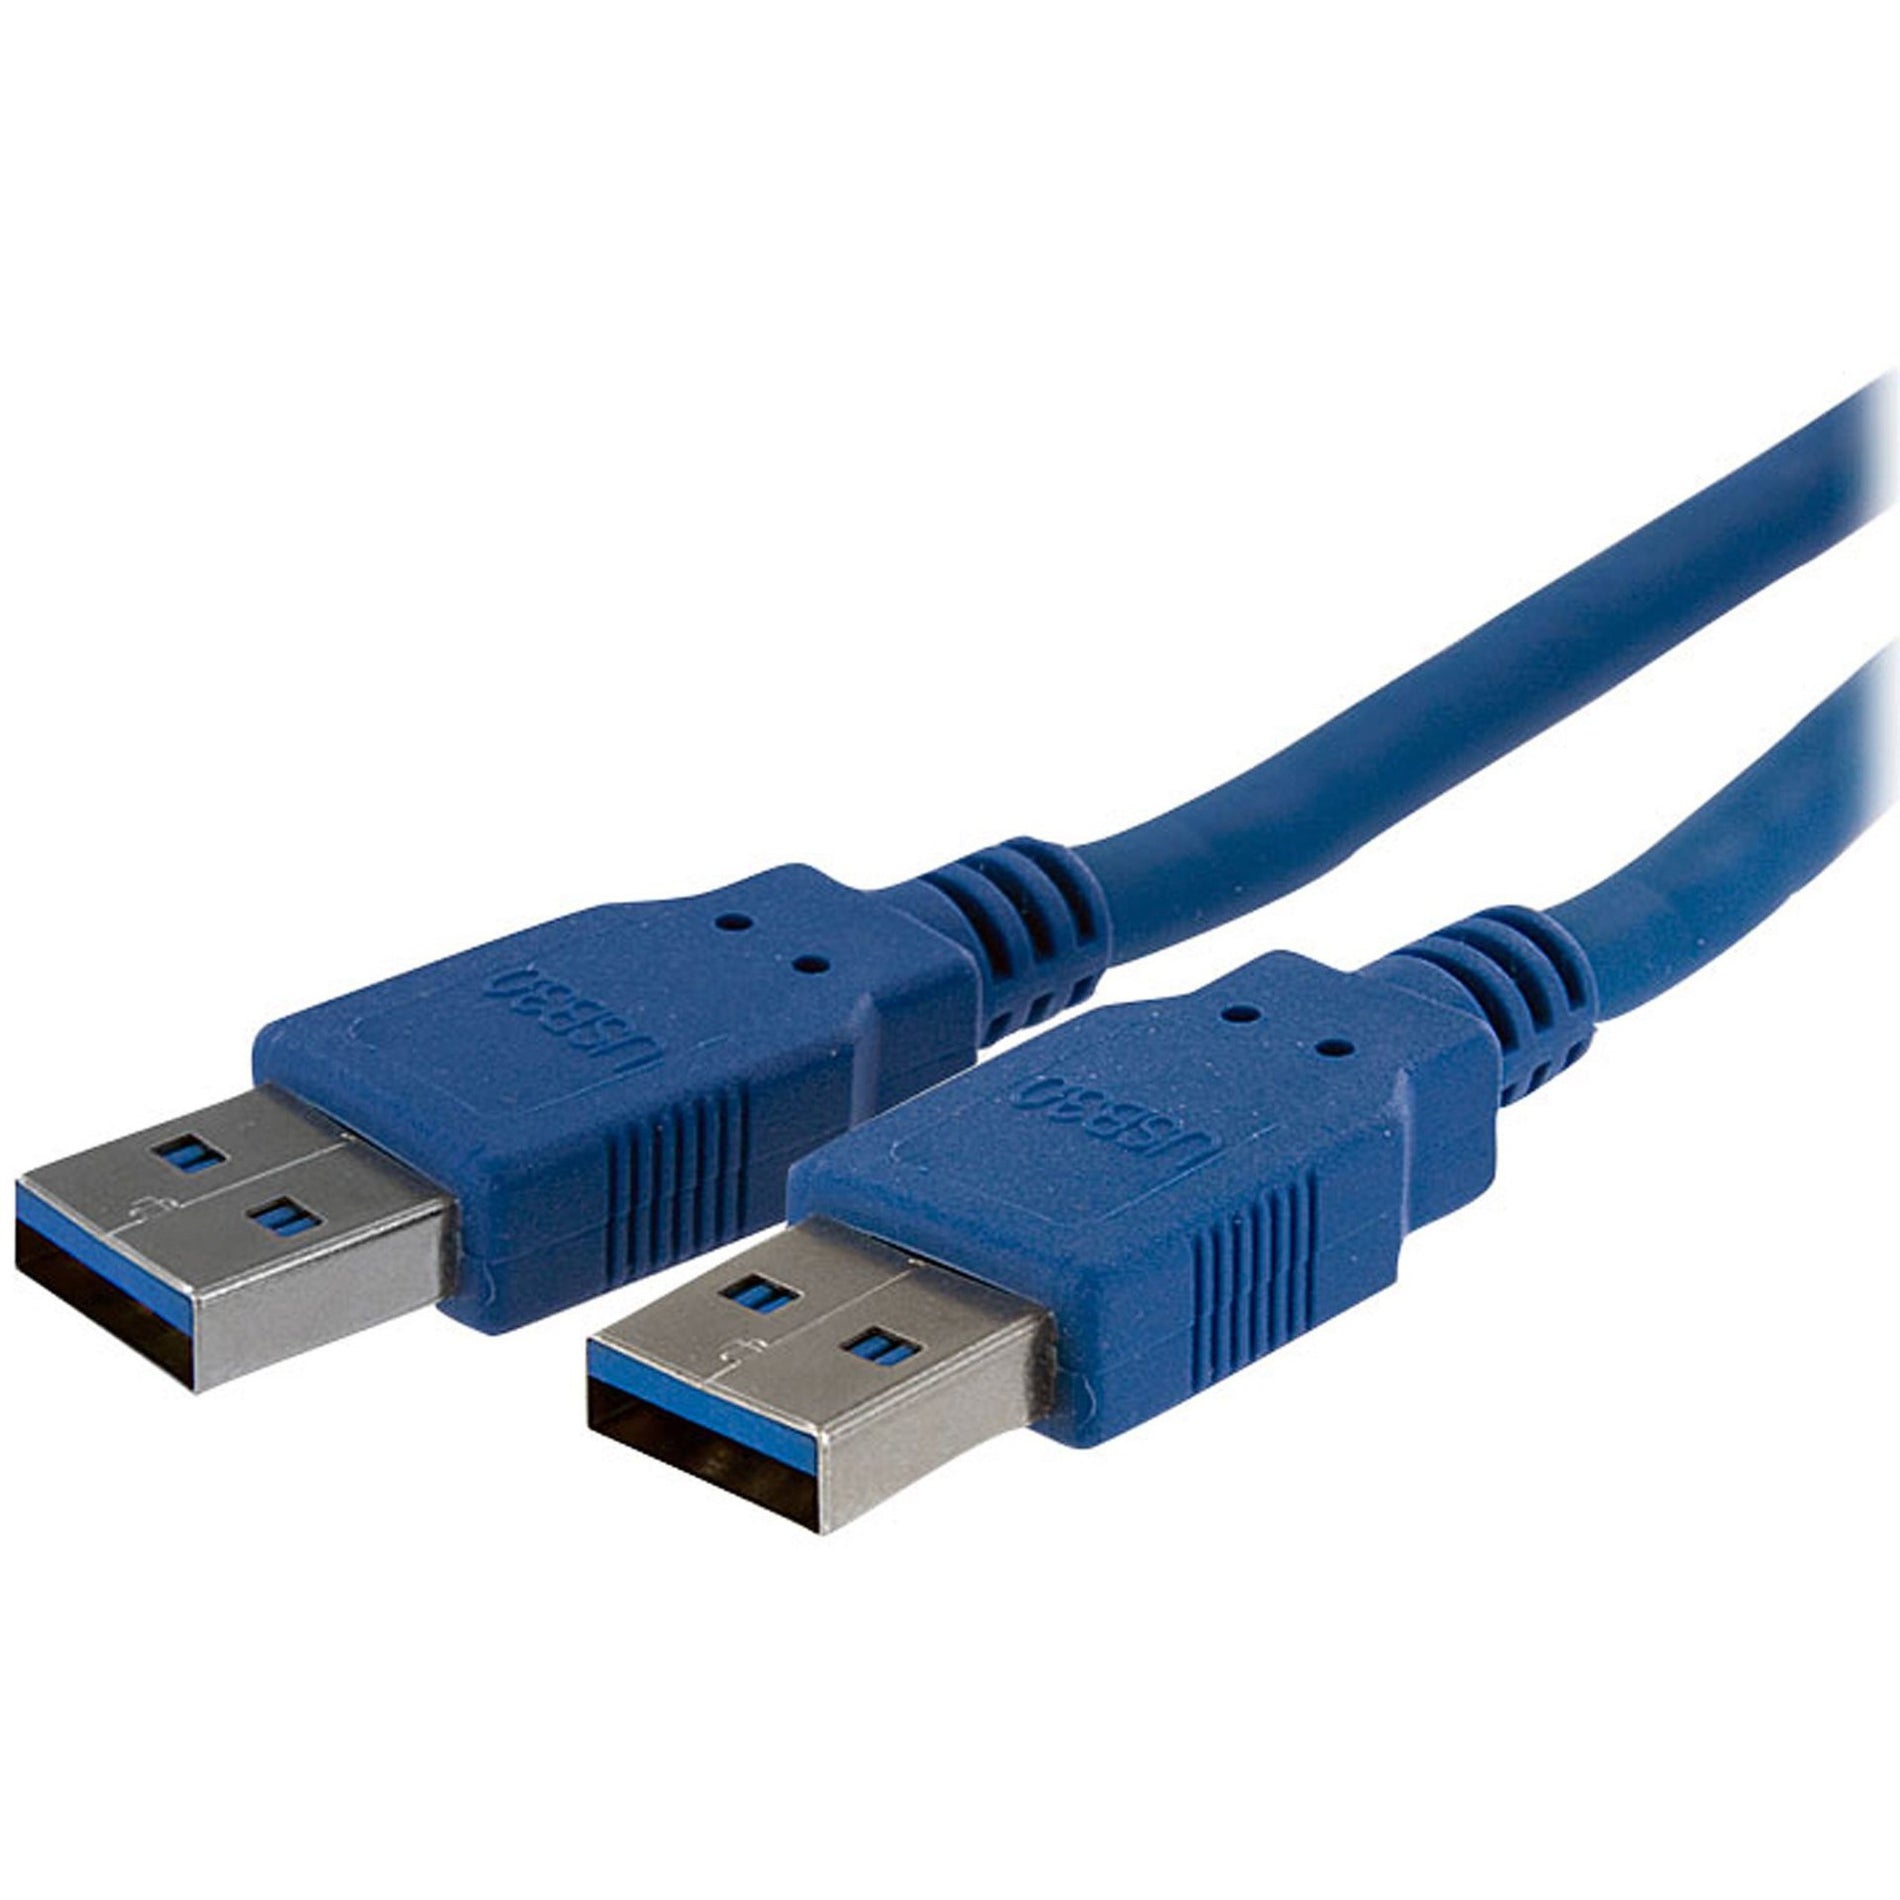 StarTech.com USB3SAA6 6 ft SuperSpeed USB 3.0 Cable A to A - M/M, High-Speed Data Transfer, EMI Protection